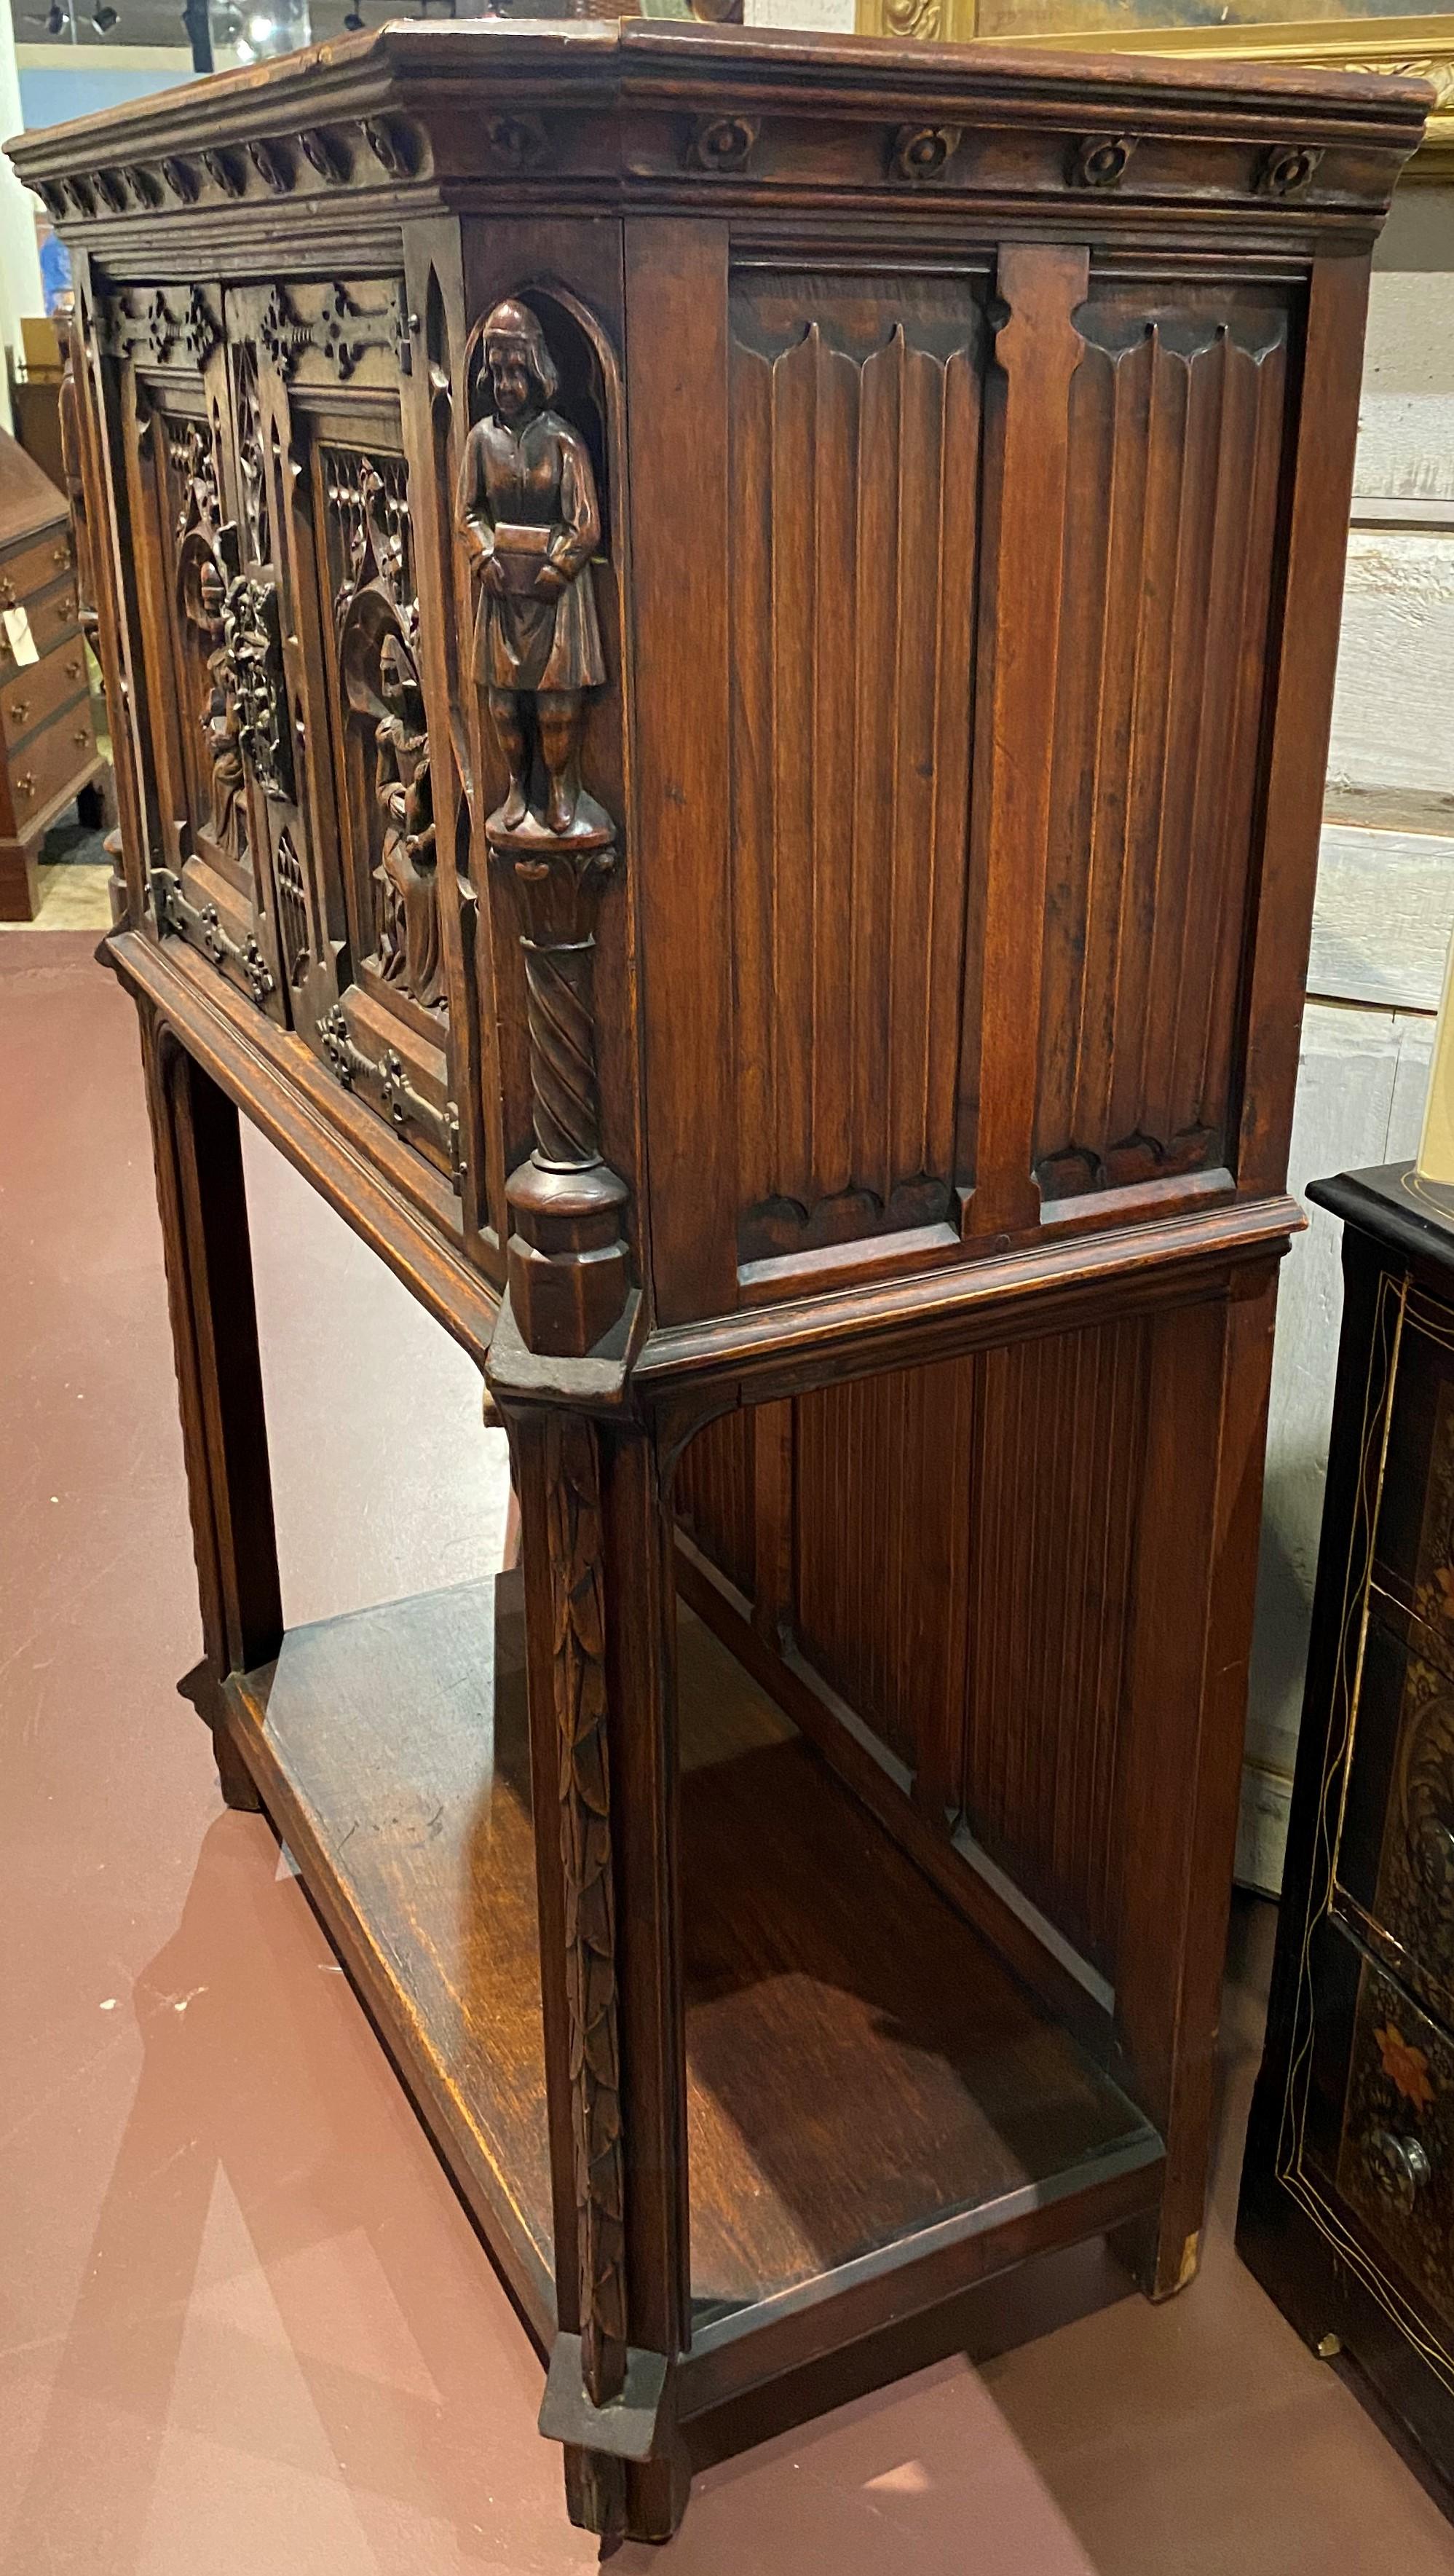 19th Century Continental Gothic Style Two-Door Cupboard or Altar with Figural Carving